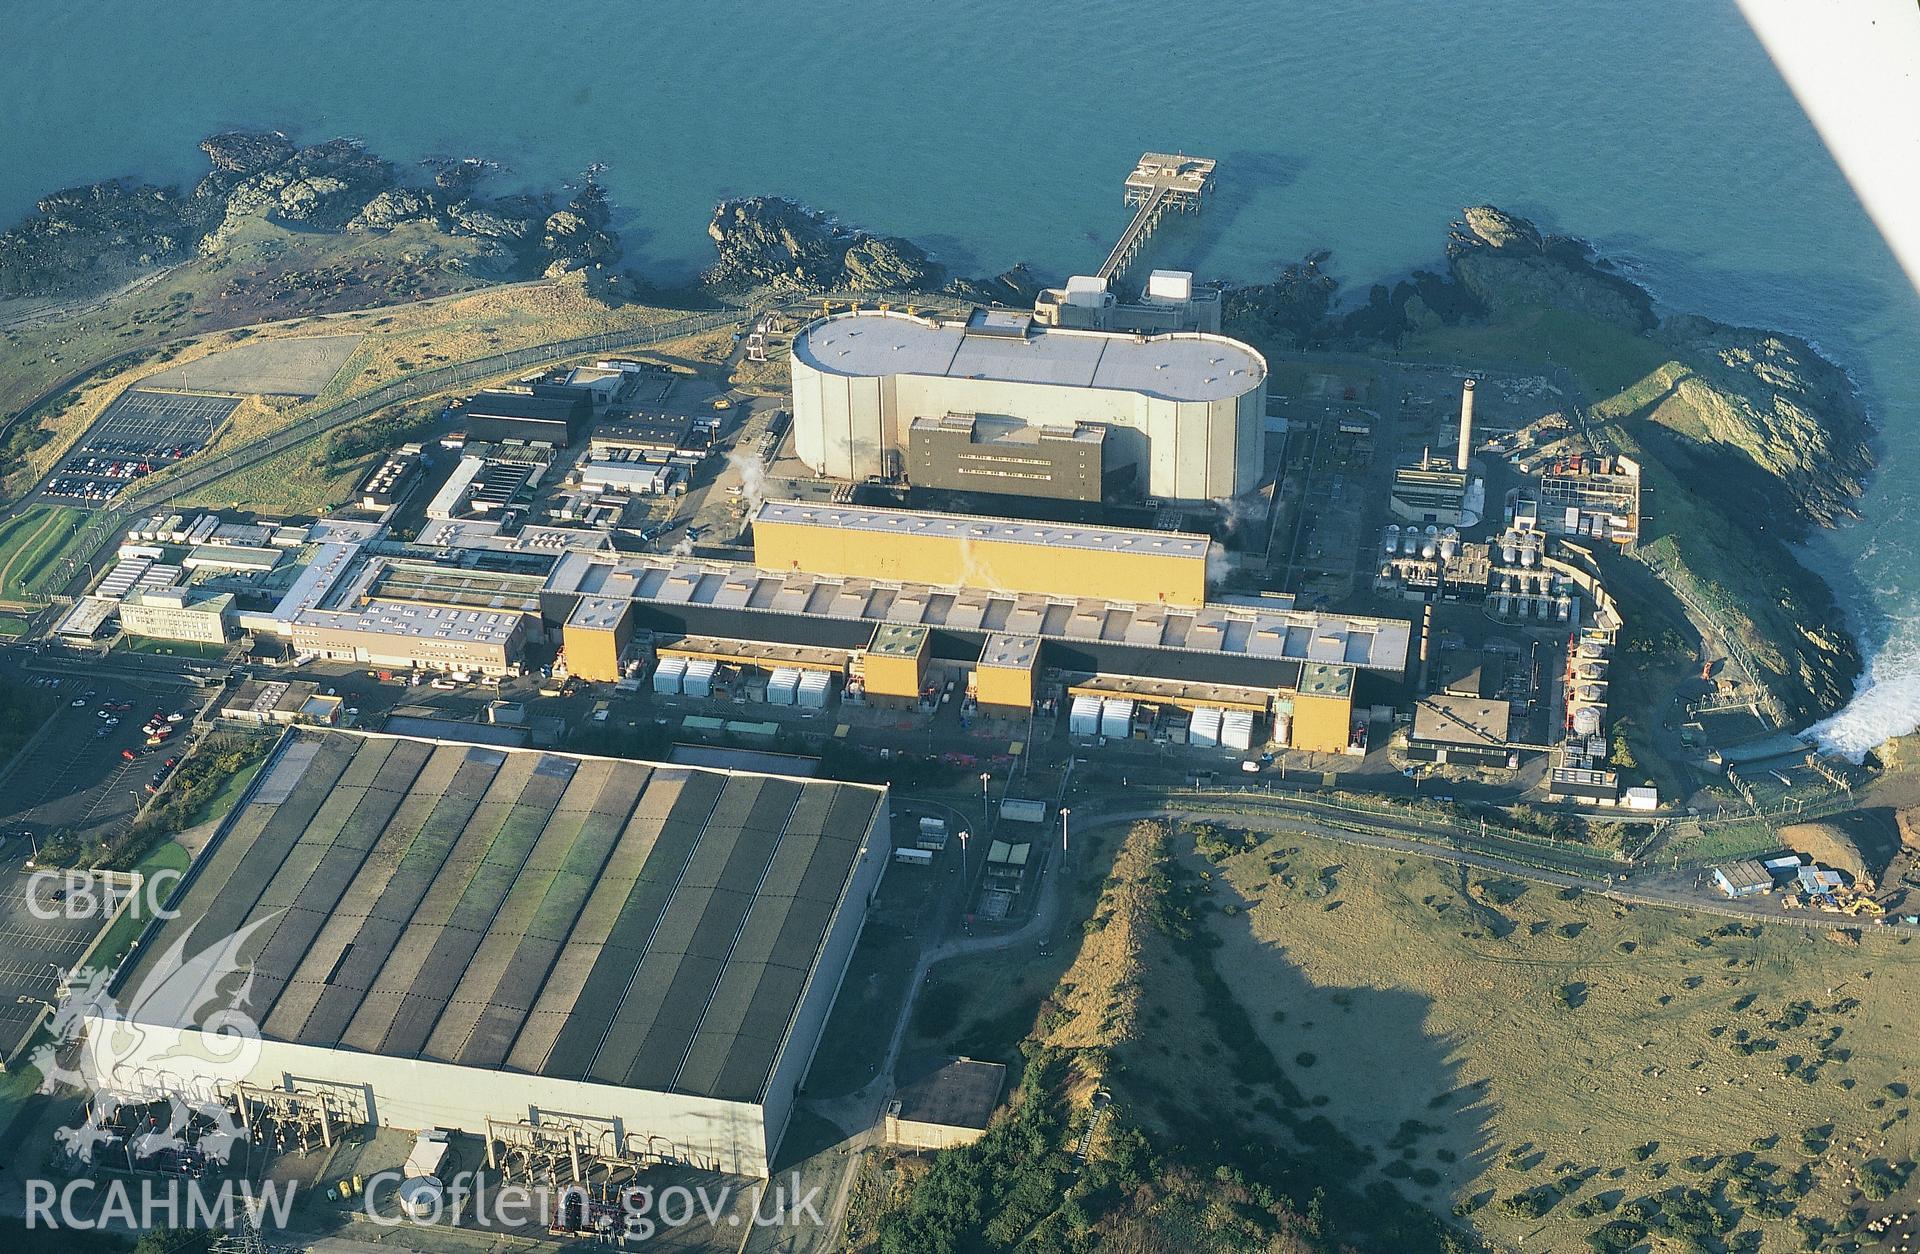 Slide of RCAHMW colour oblique aerial photograph of Wylfa Nuclear Power Station, taken by T.G. Driver, 10/1/1999.